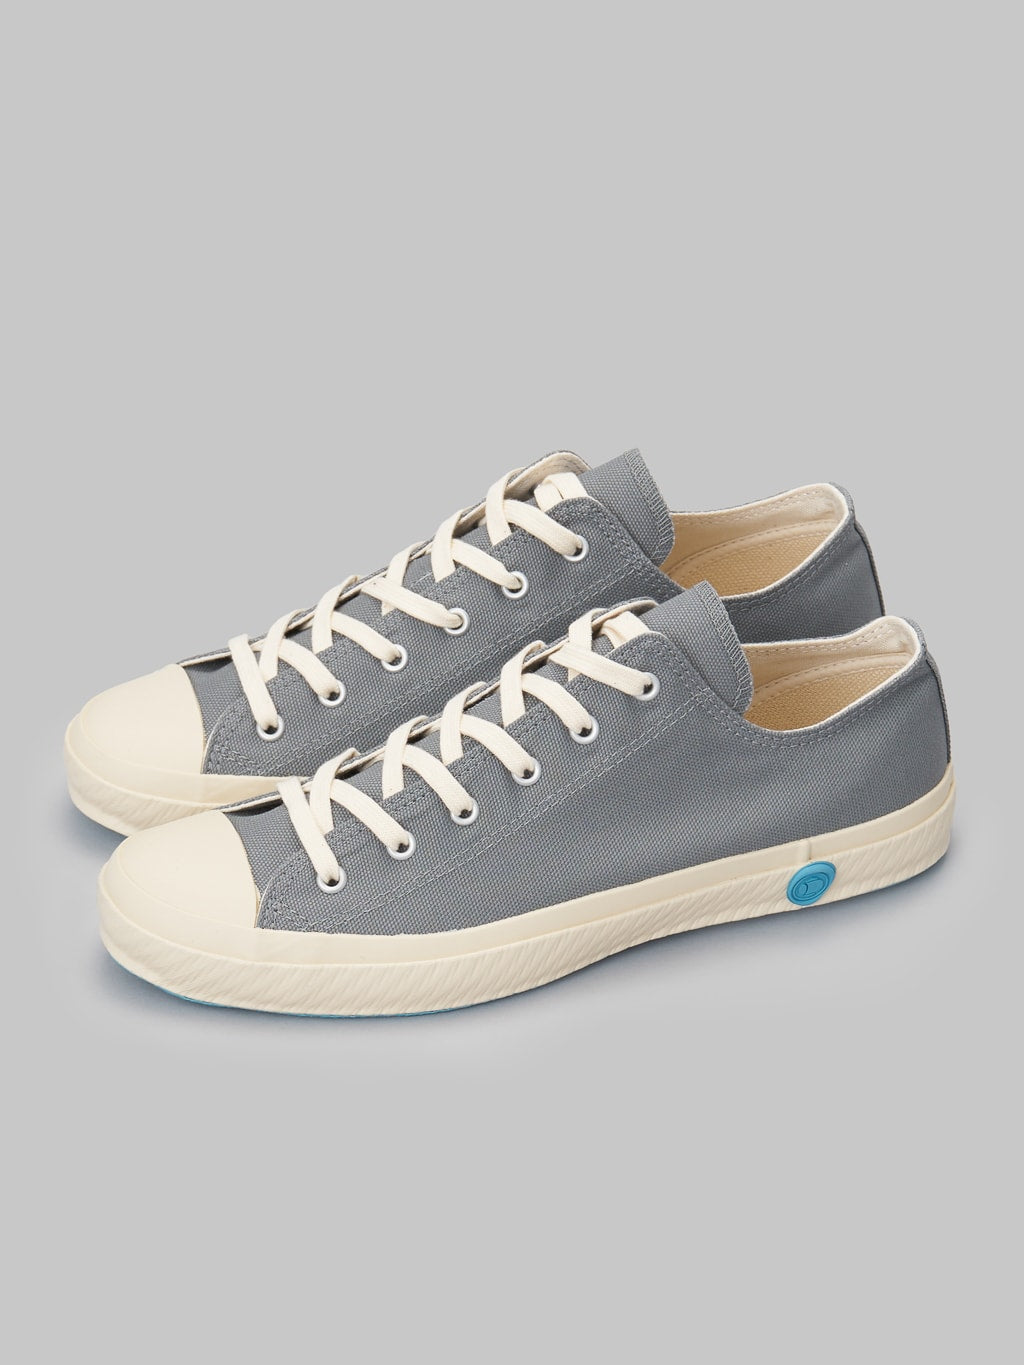 Shoes like pottery low grey sneakers made in japan